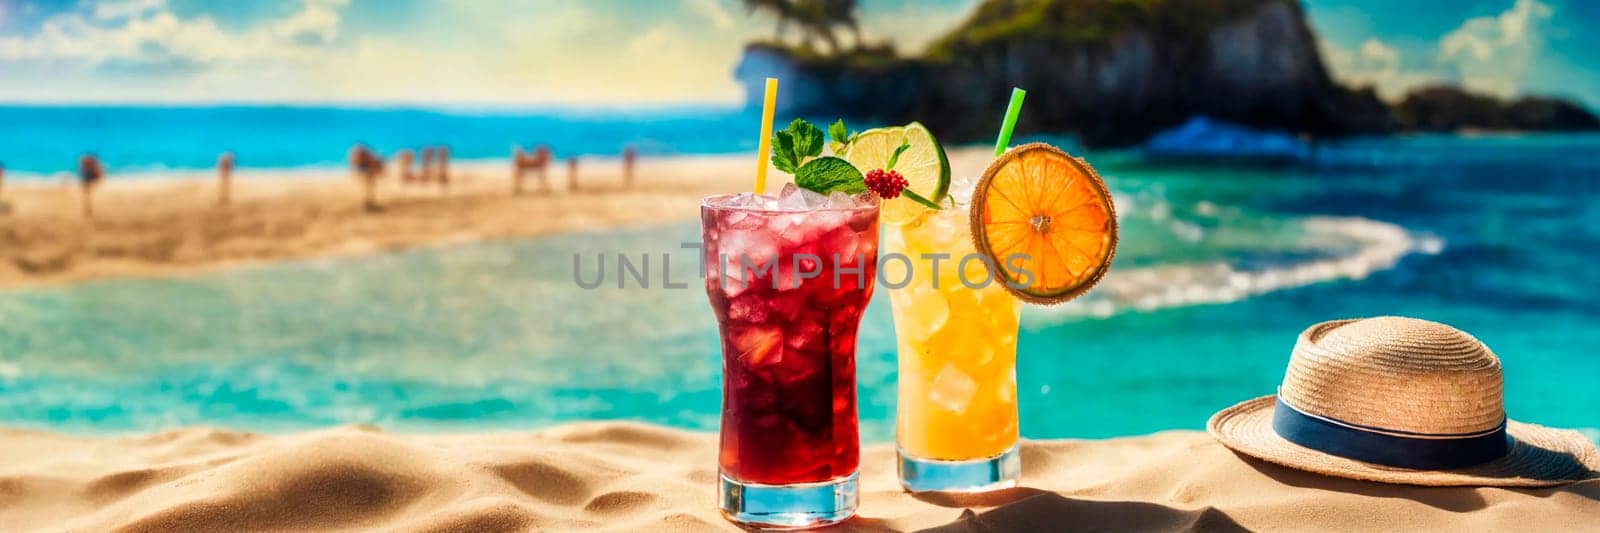 cocktails on the seashore overlooking palm trees. Selective focus. by yanadjana